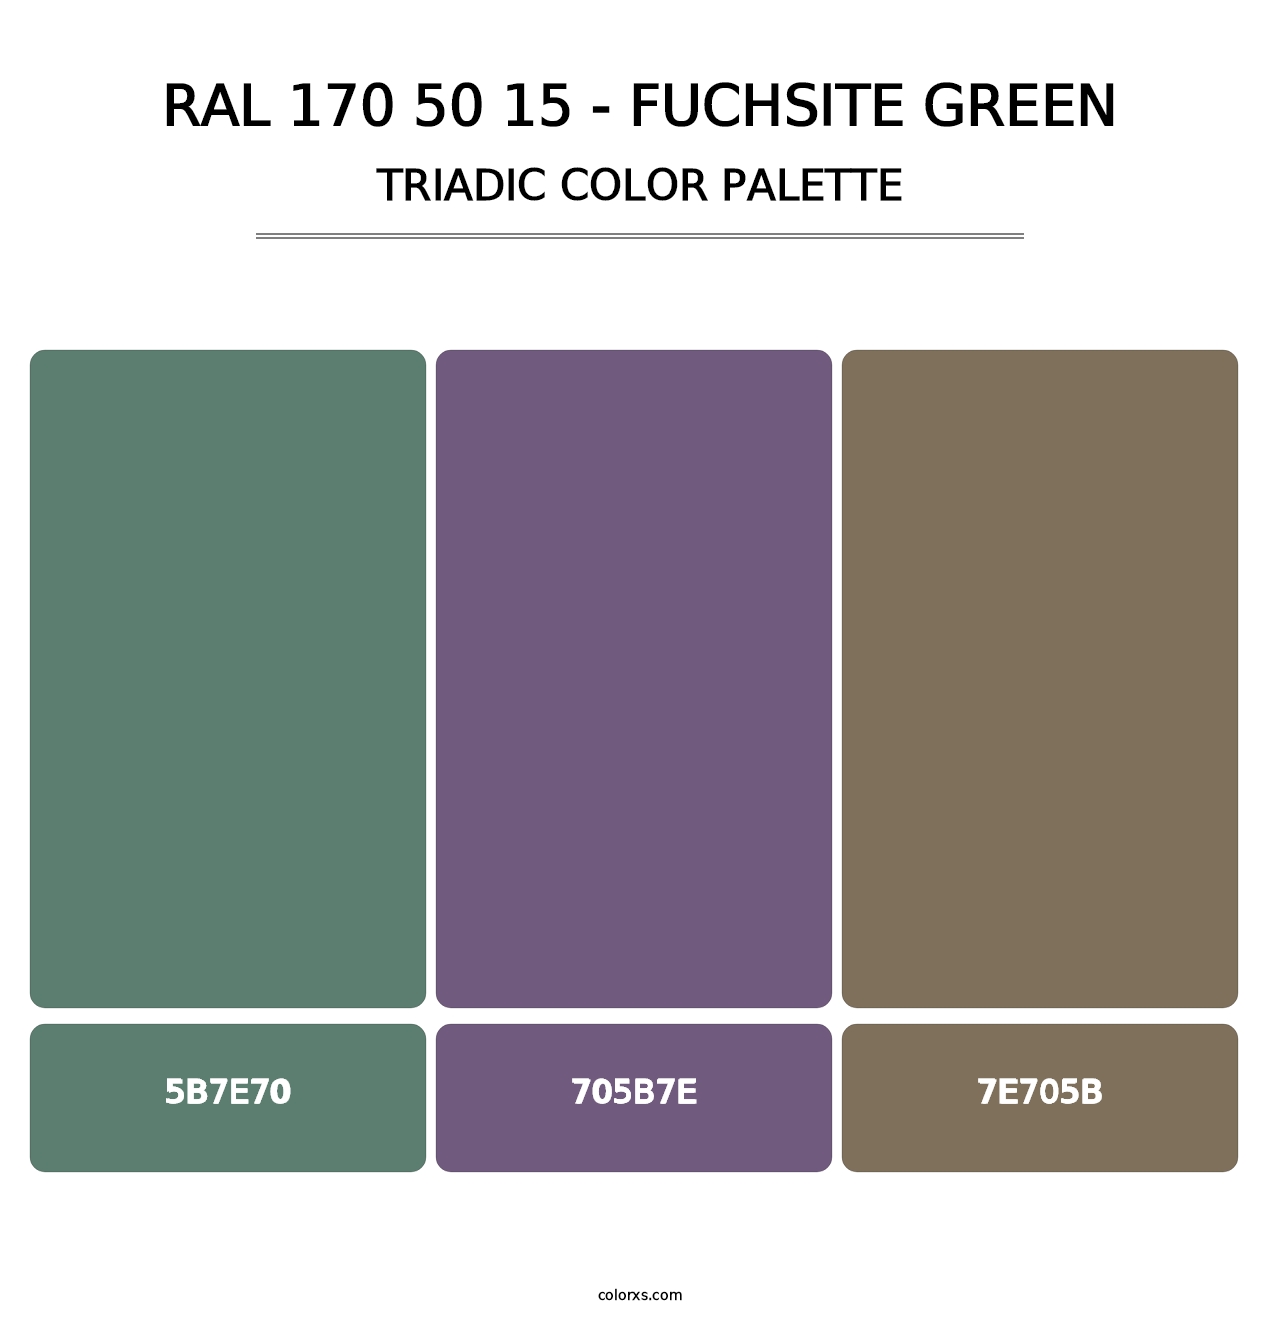 RAL 170 50 15 - Fuchsite Green - Triadic Color Palette